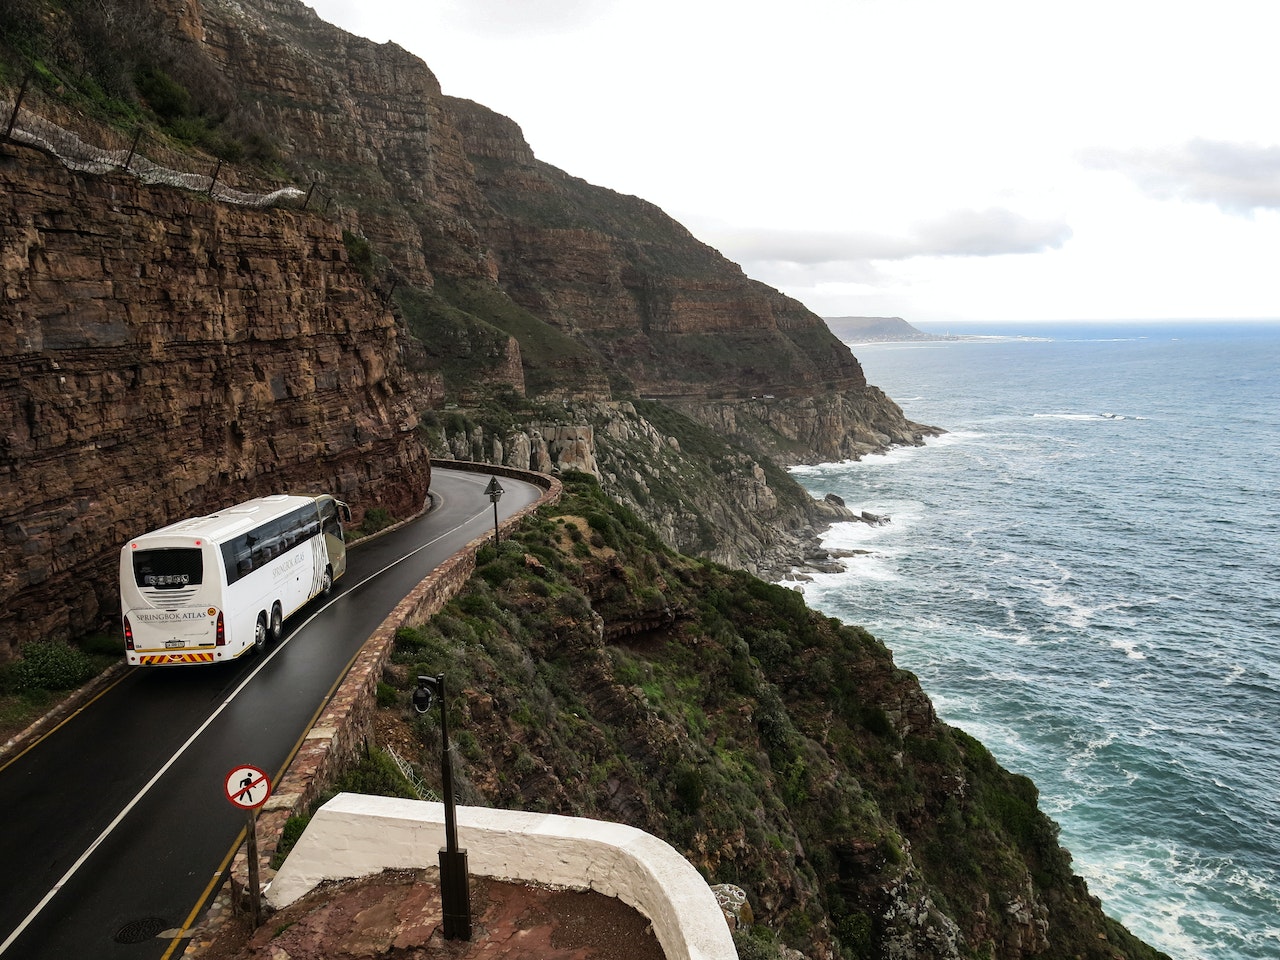 White Bus on the Road Near A Cliff